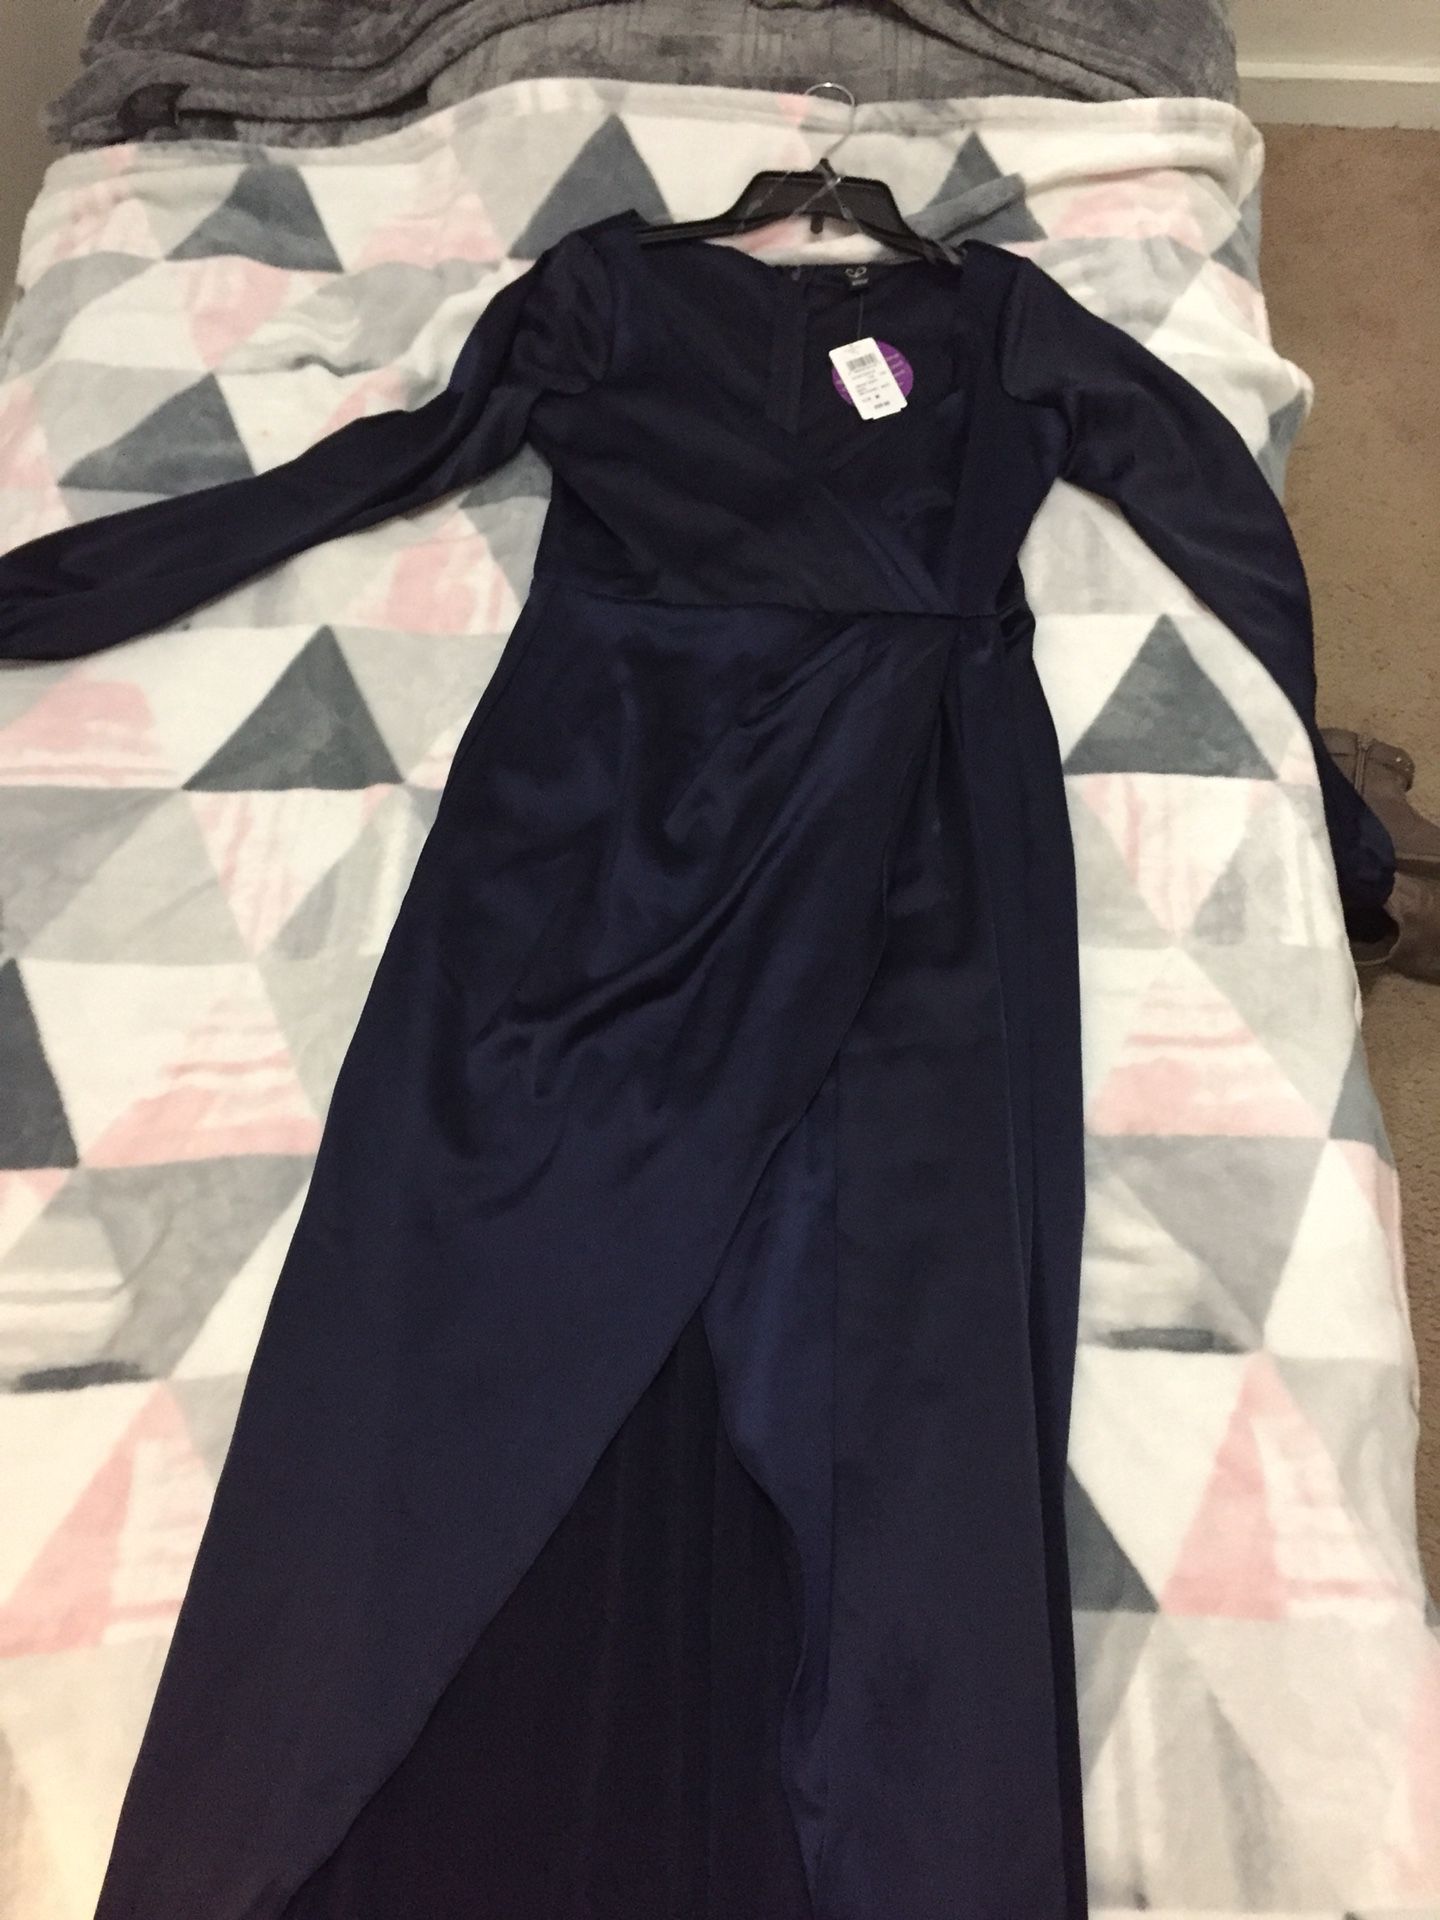 Windsor dress brand new with tags